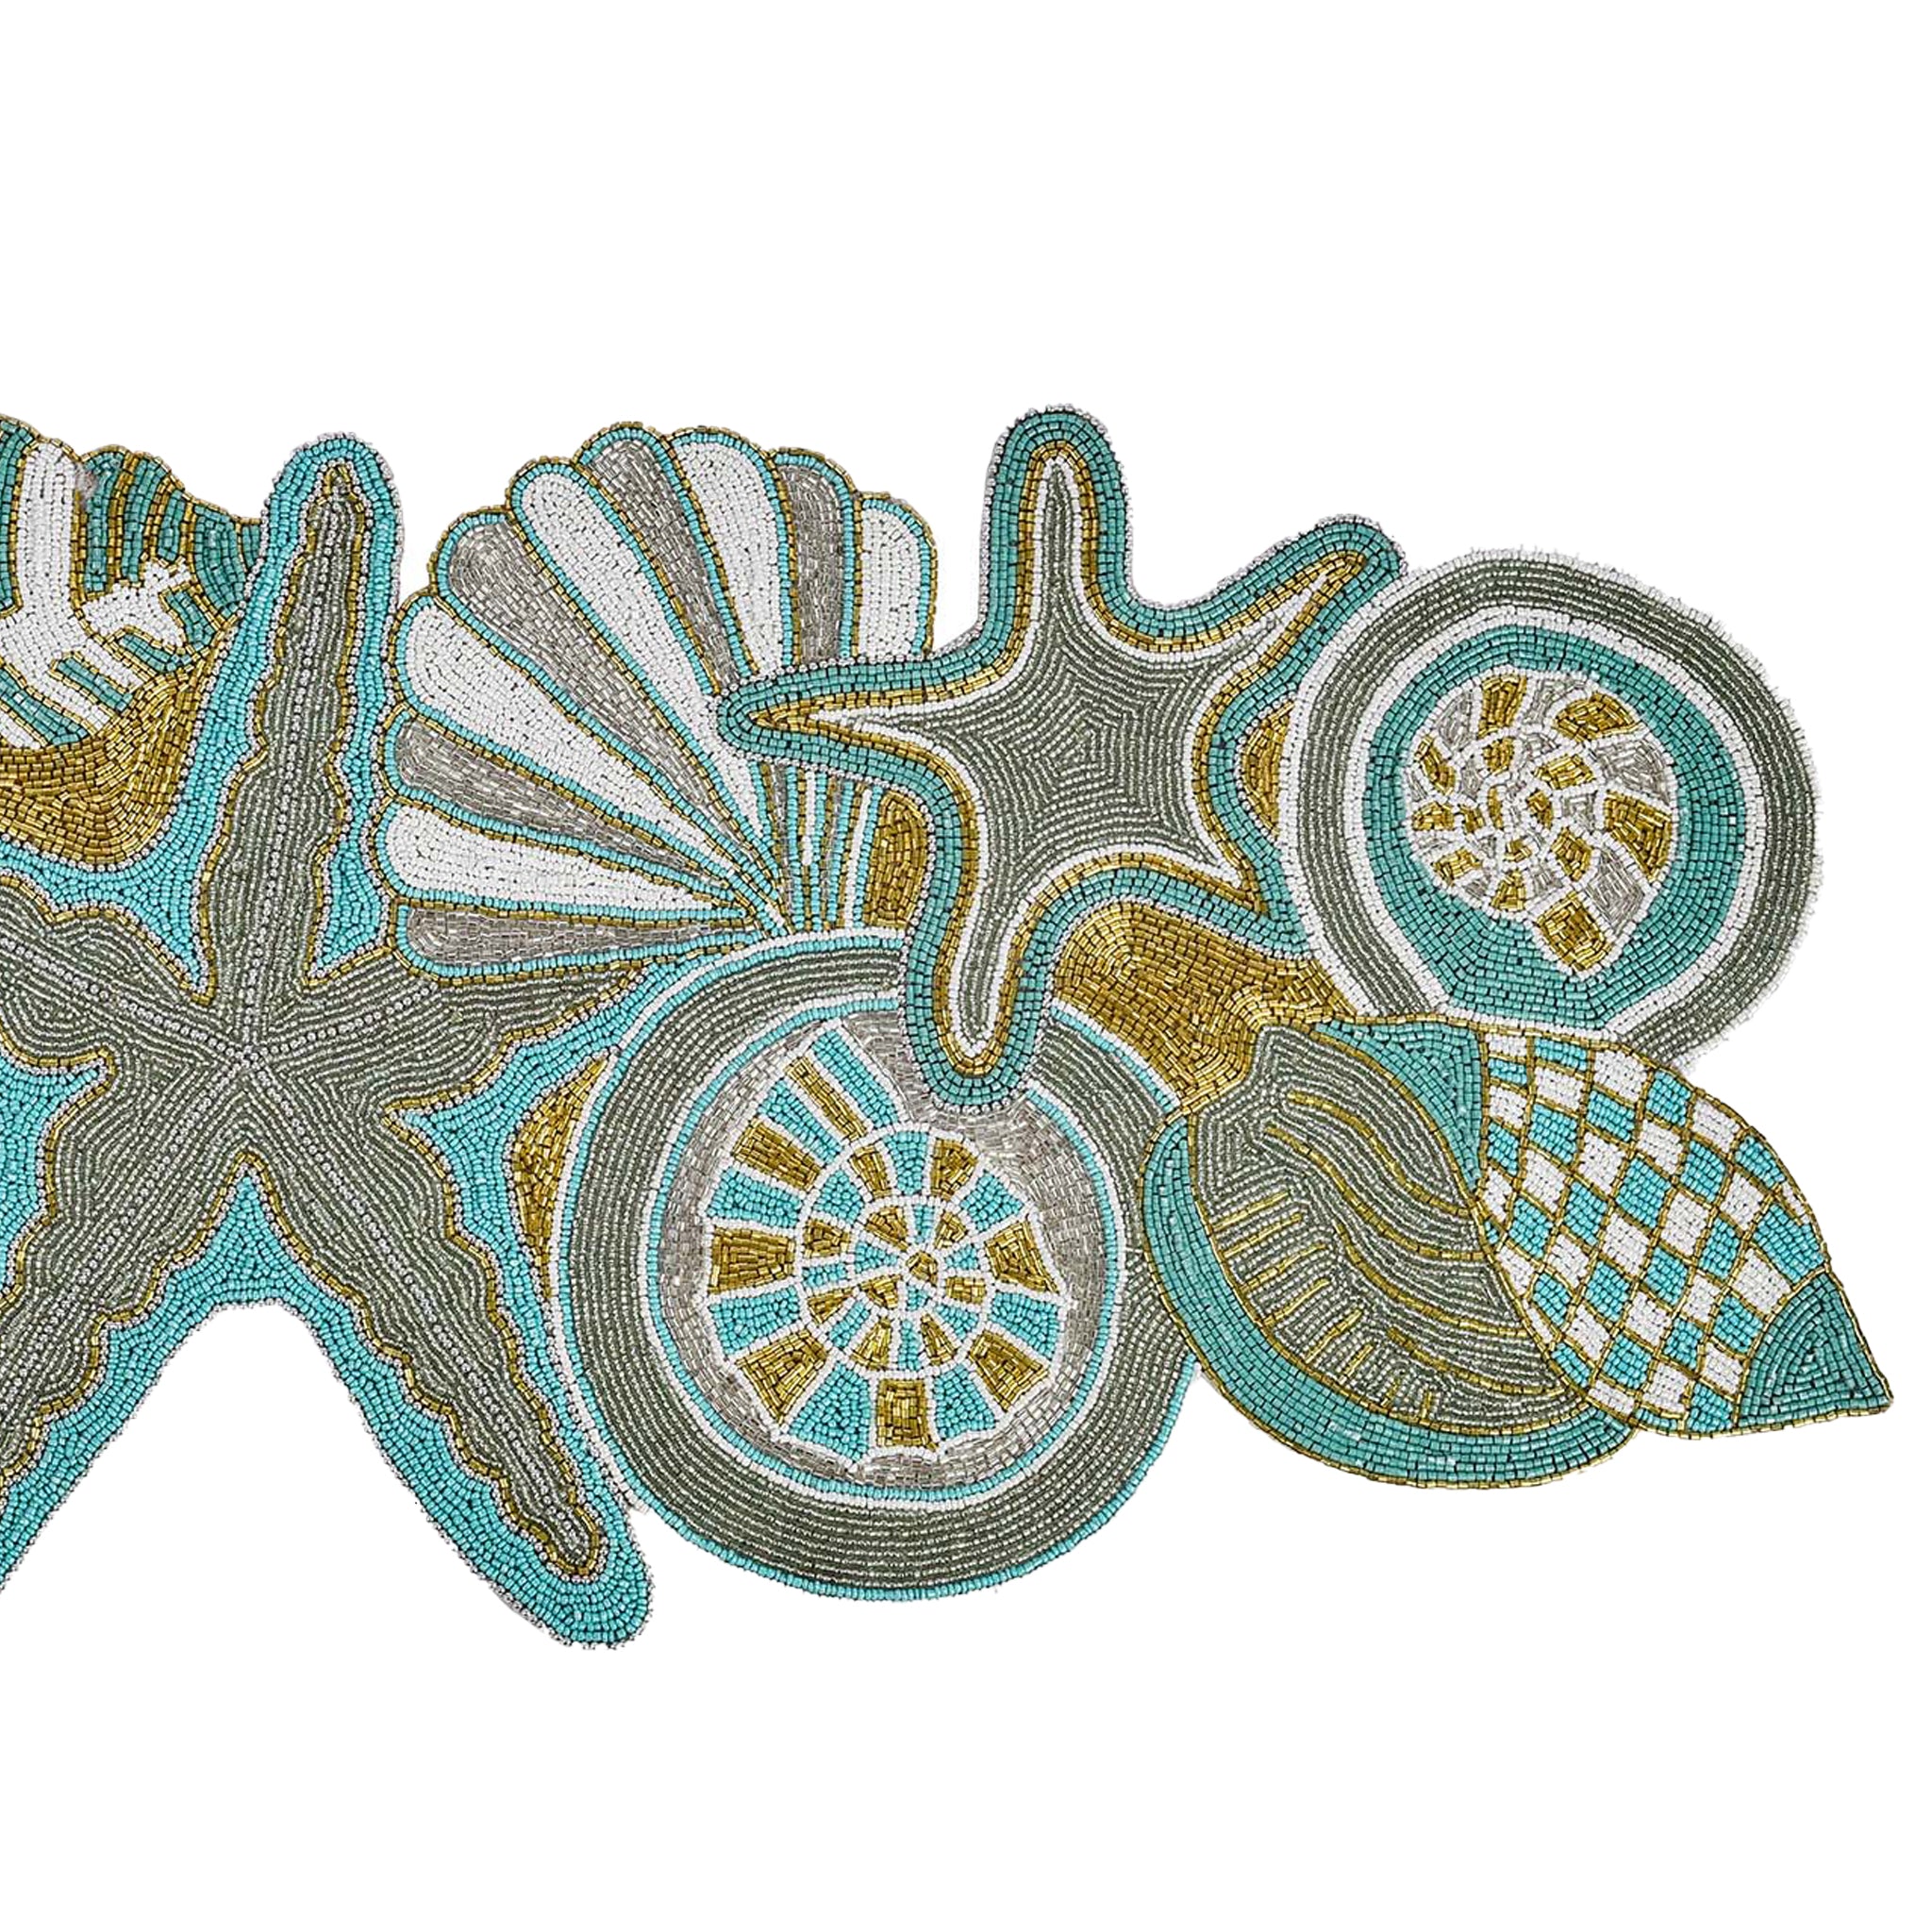 Ringo Star Fish Embroidered Table Runner / 36"x15.75" / Multi